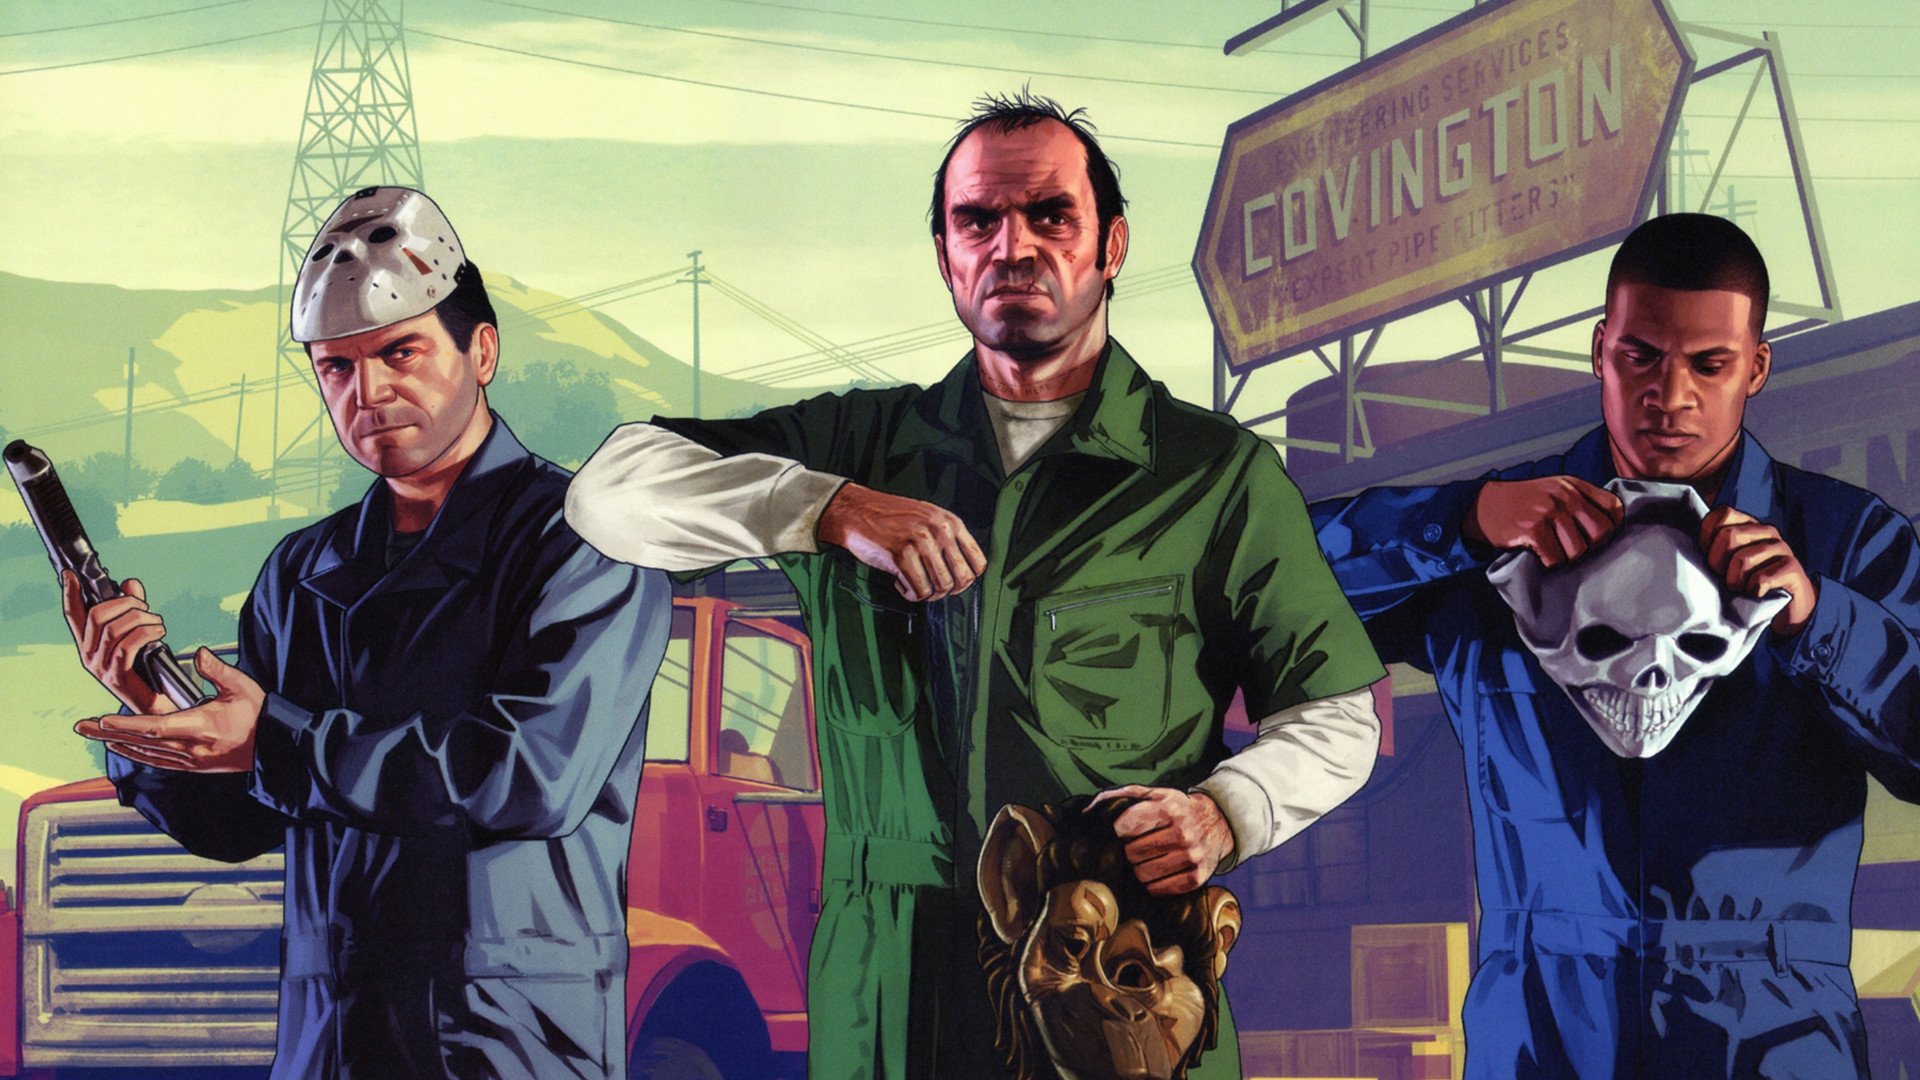 Xbox Game Pass Adds Gta5 The Day After It Leaves Ps Now Push Square